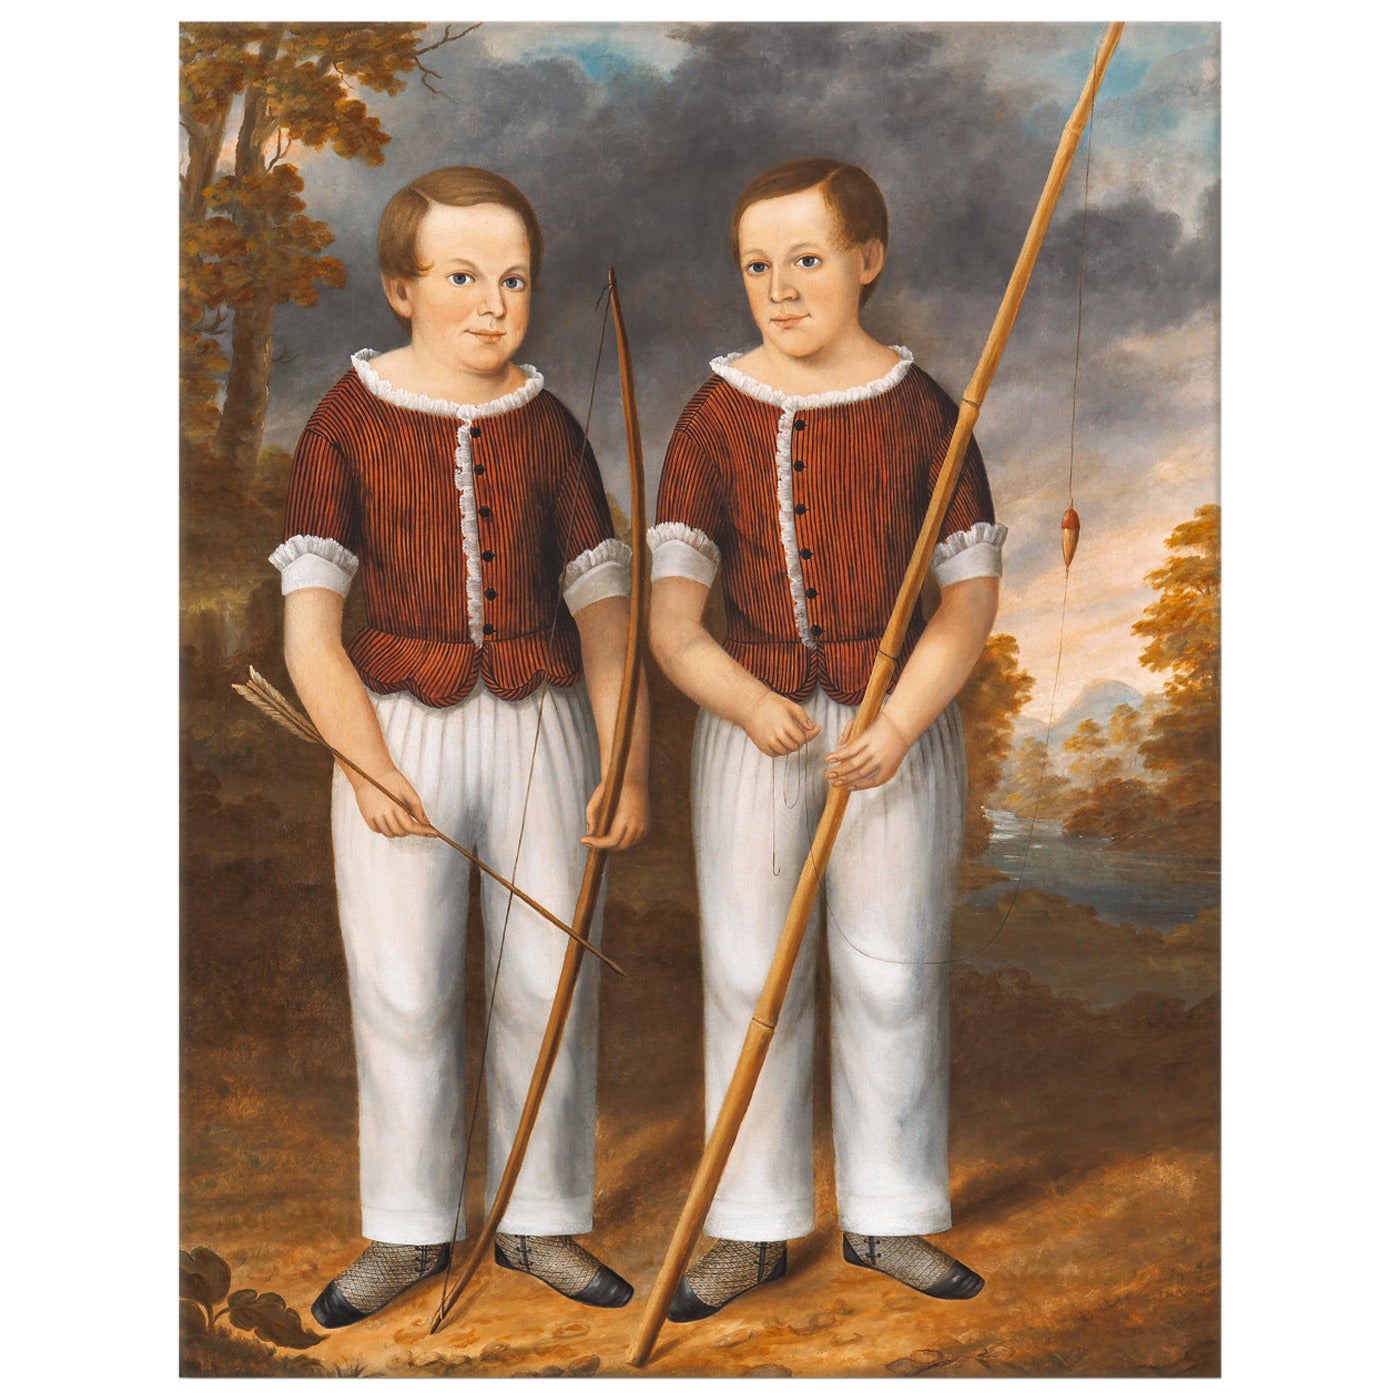 Joseph Goodhue Chandler, "Two Boys with Bow and Fishing Pole" Oil on Canvas